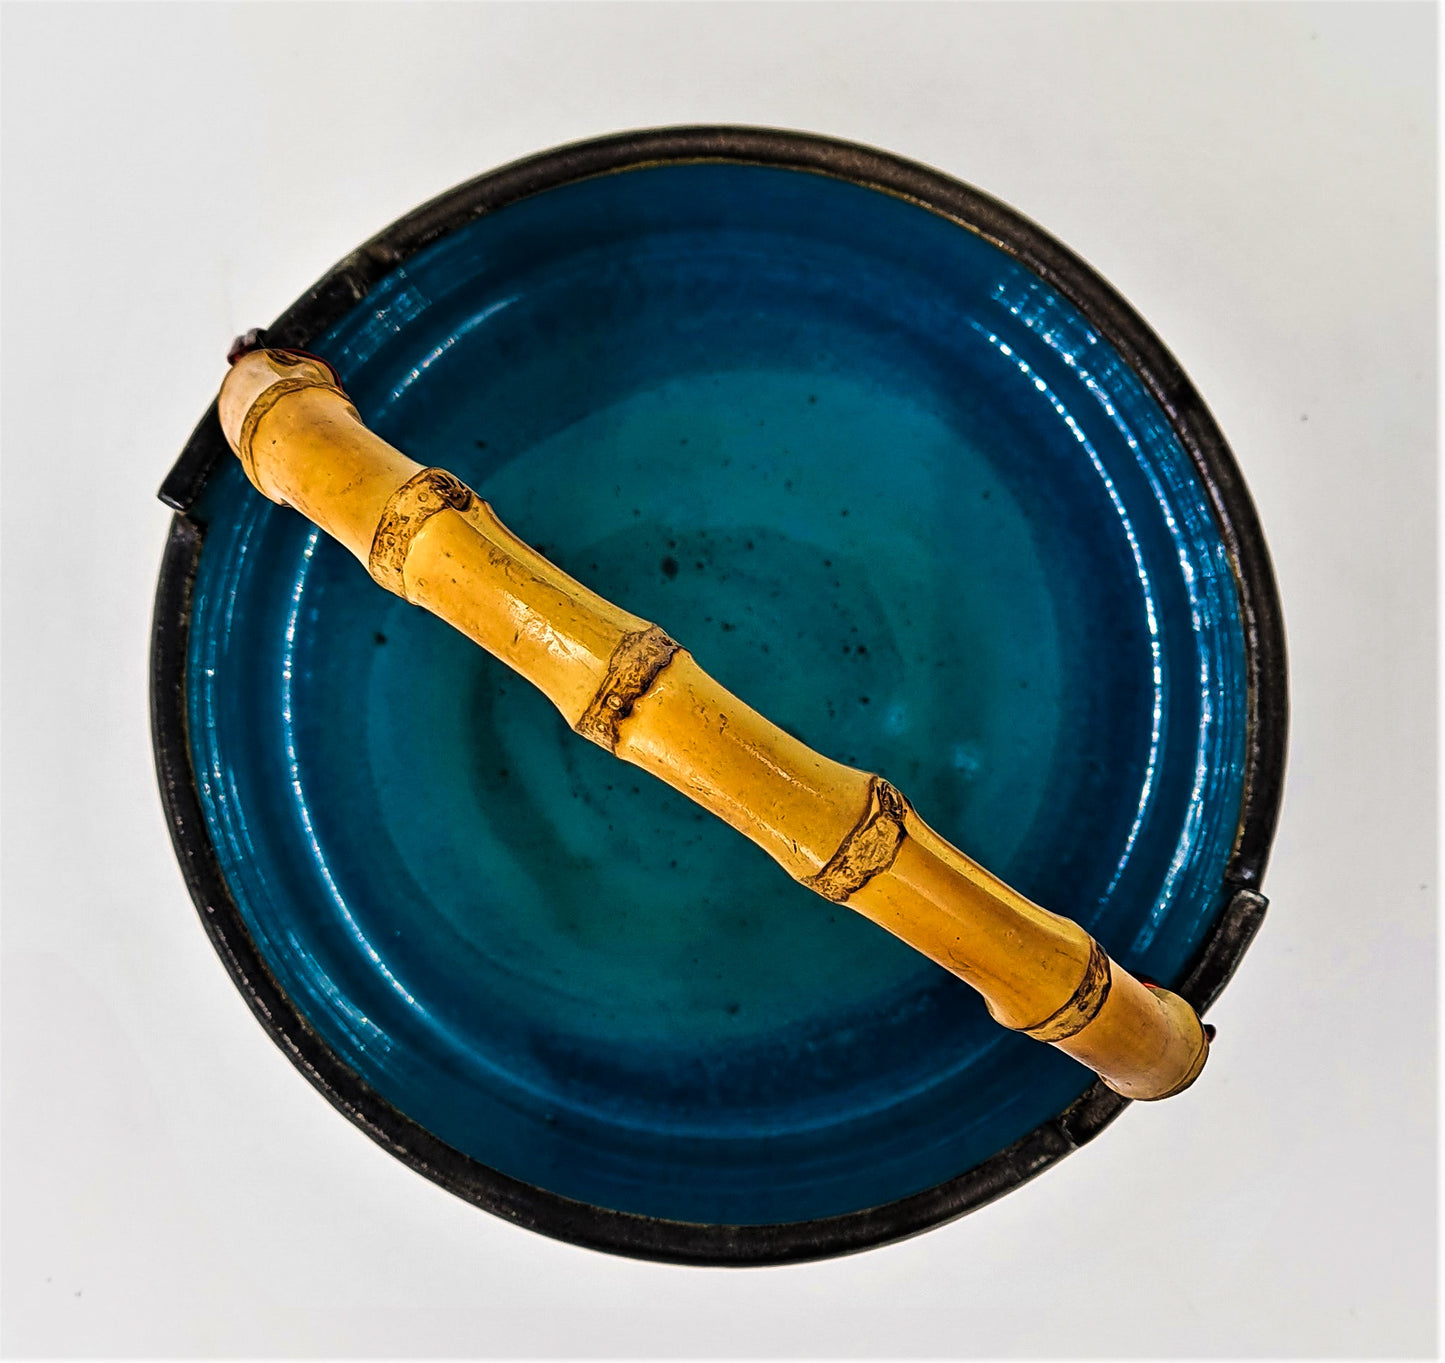 Blue Orient Rice Server / Bucket (with cane handle)